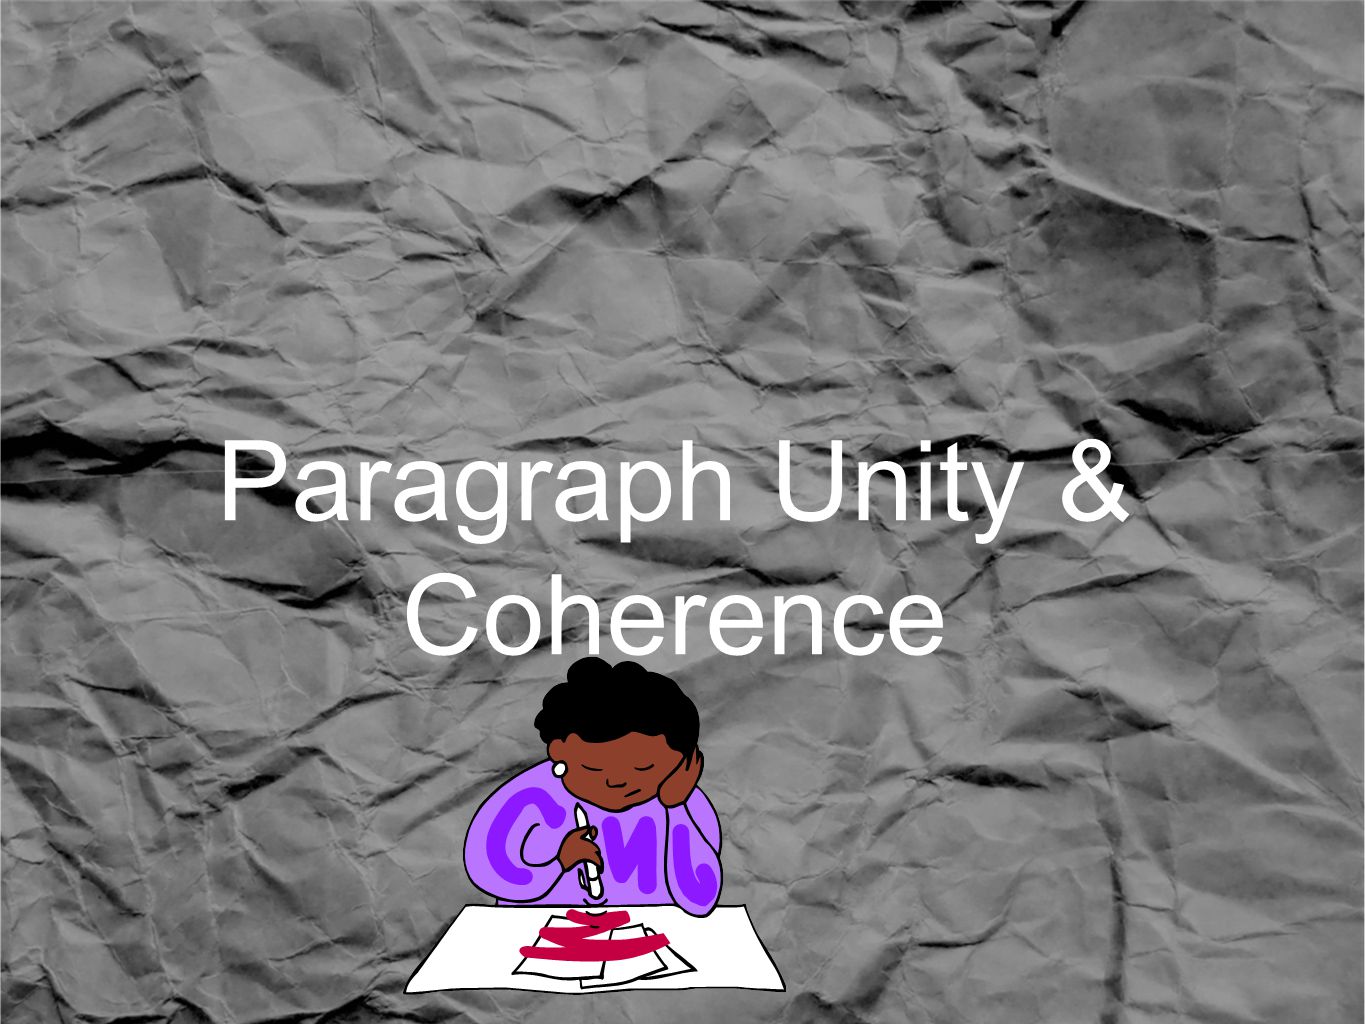 Paragraph Unity & Coherence